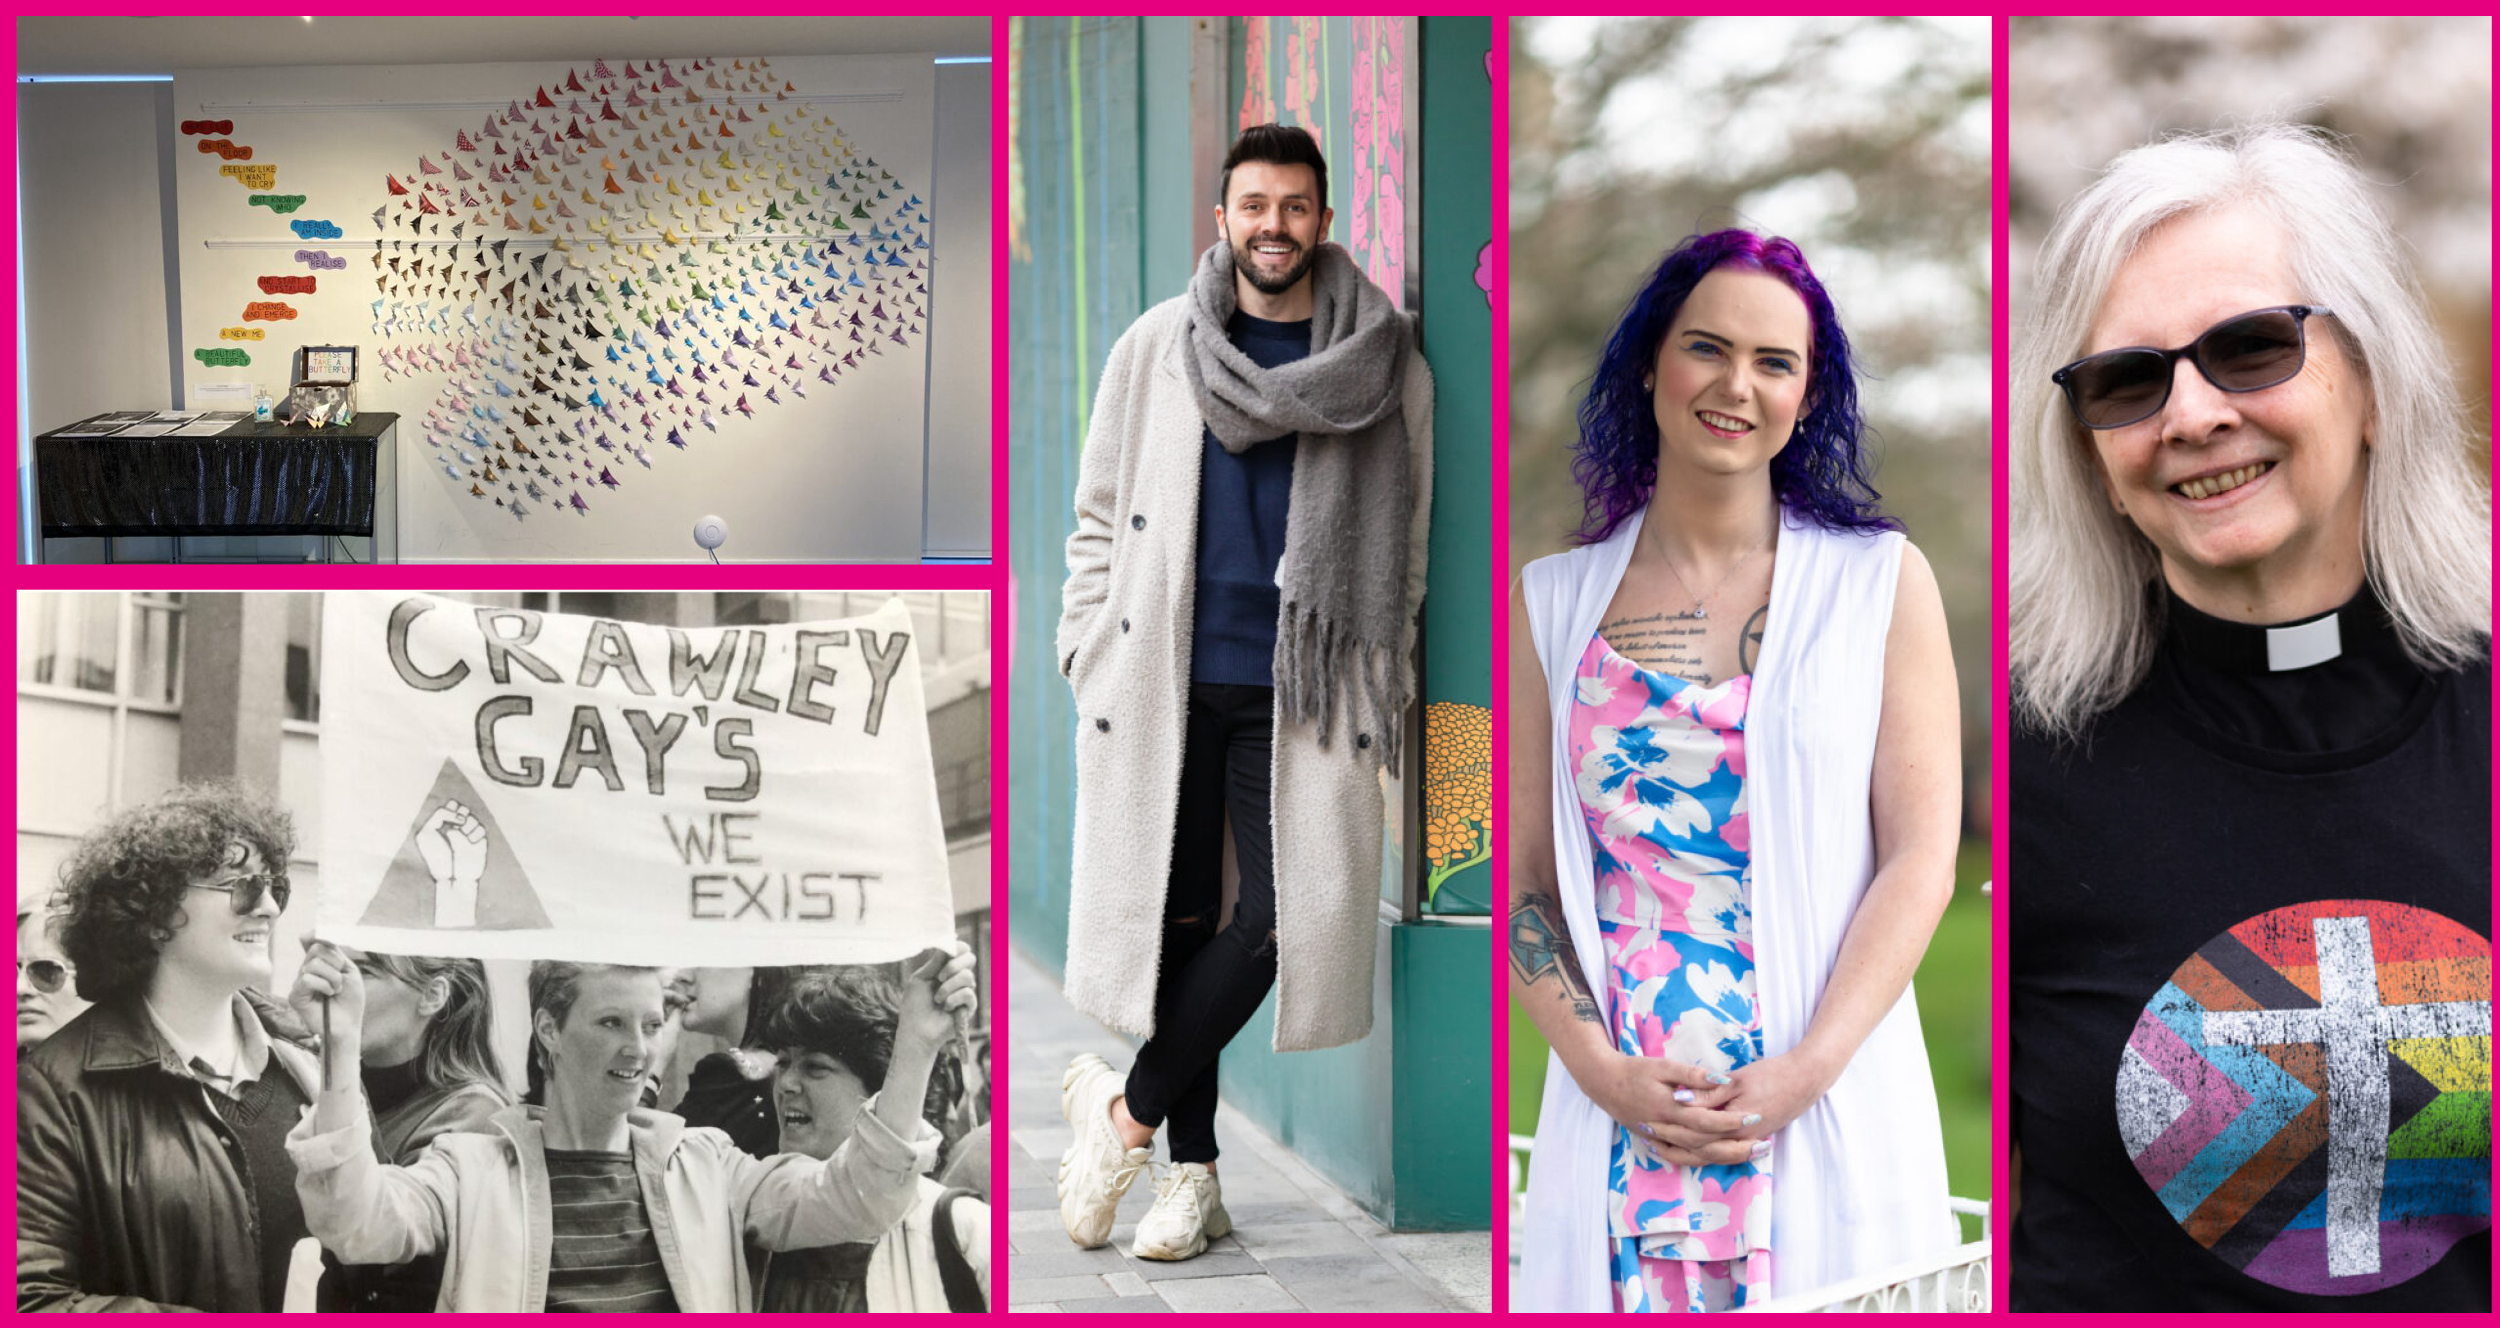 New exhibition exploring the lives and experiences of Crawley’s LGBTQ+ population opens at Crawley Museum